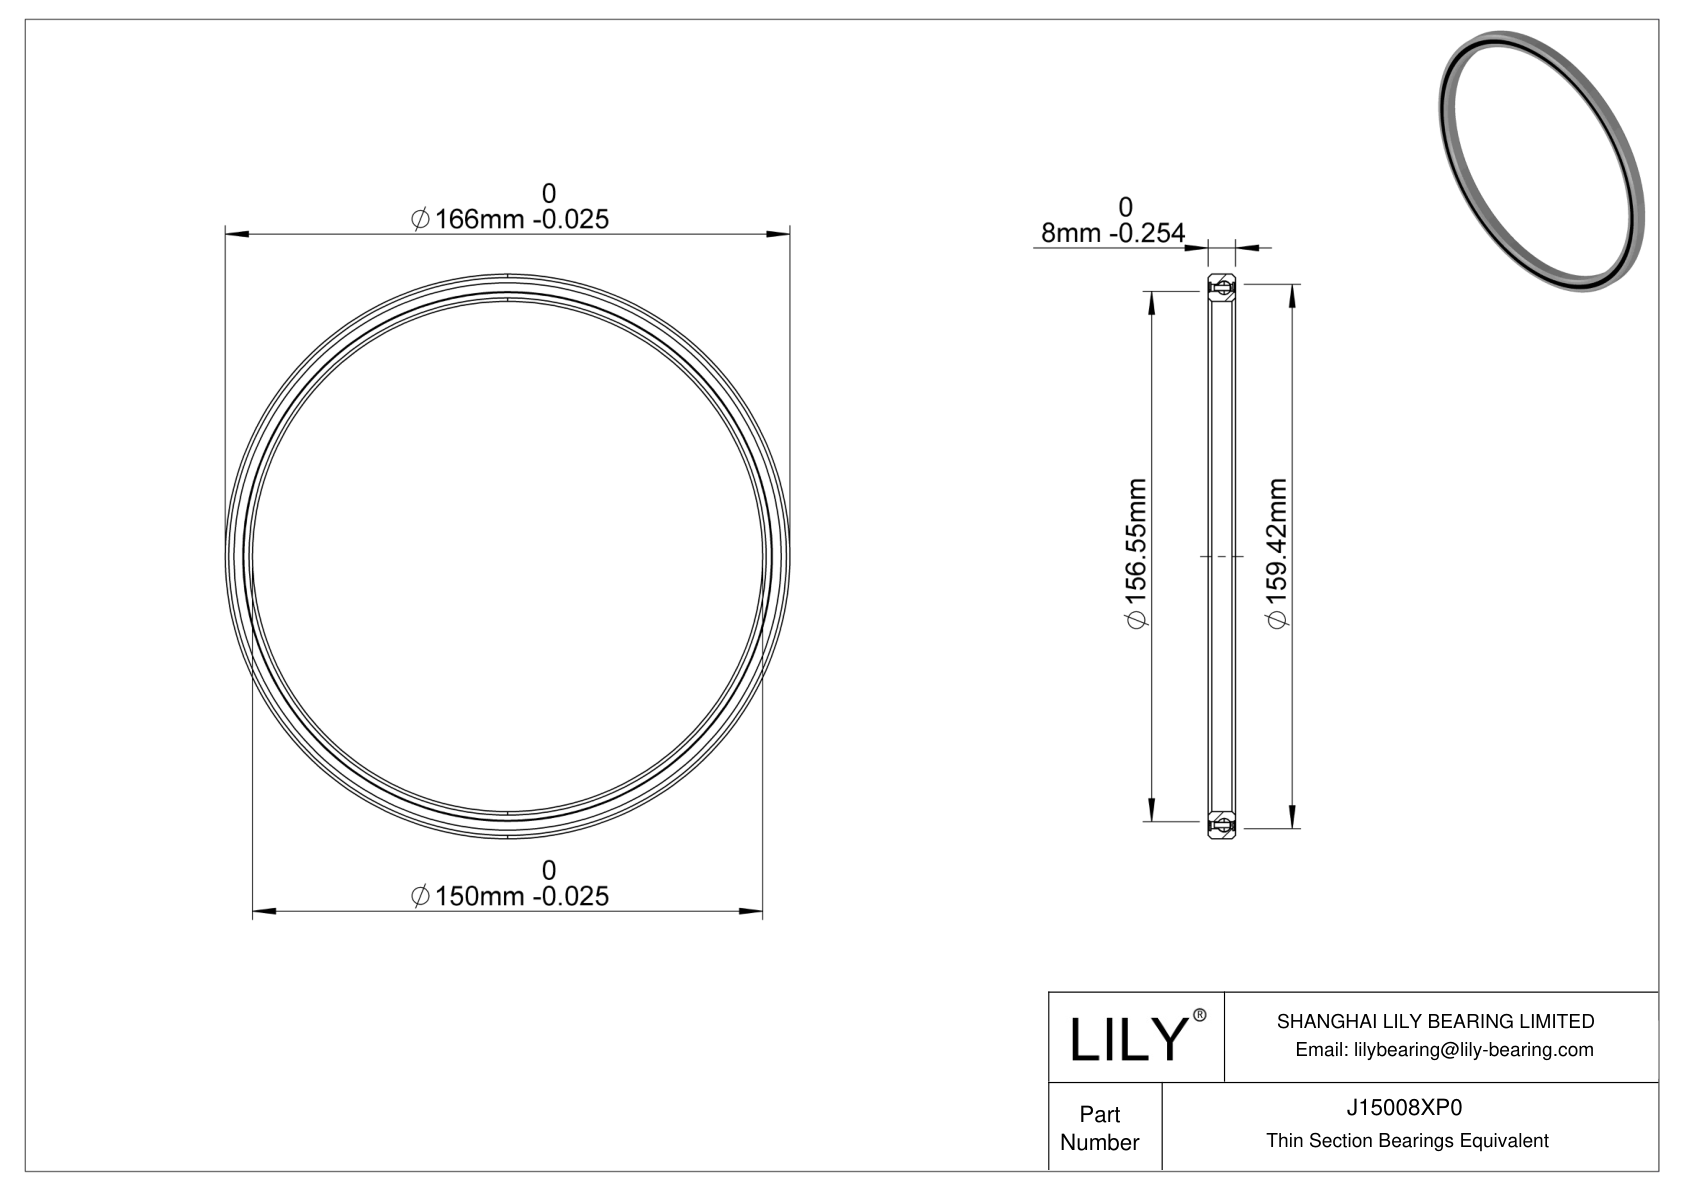 J15008XP0 Constant Section (CS) Bearings cad drawing